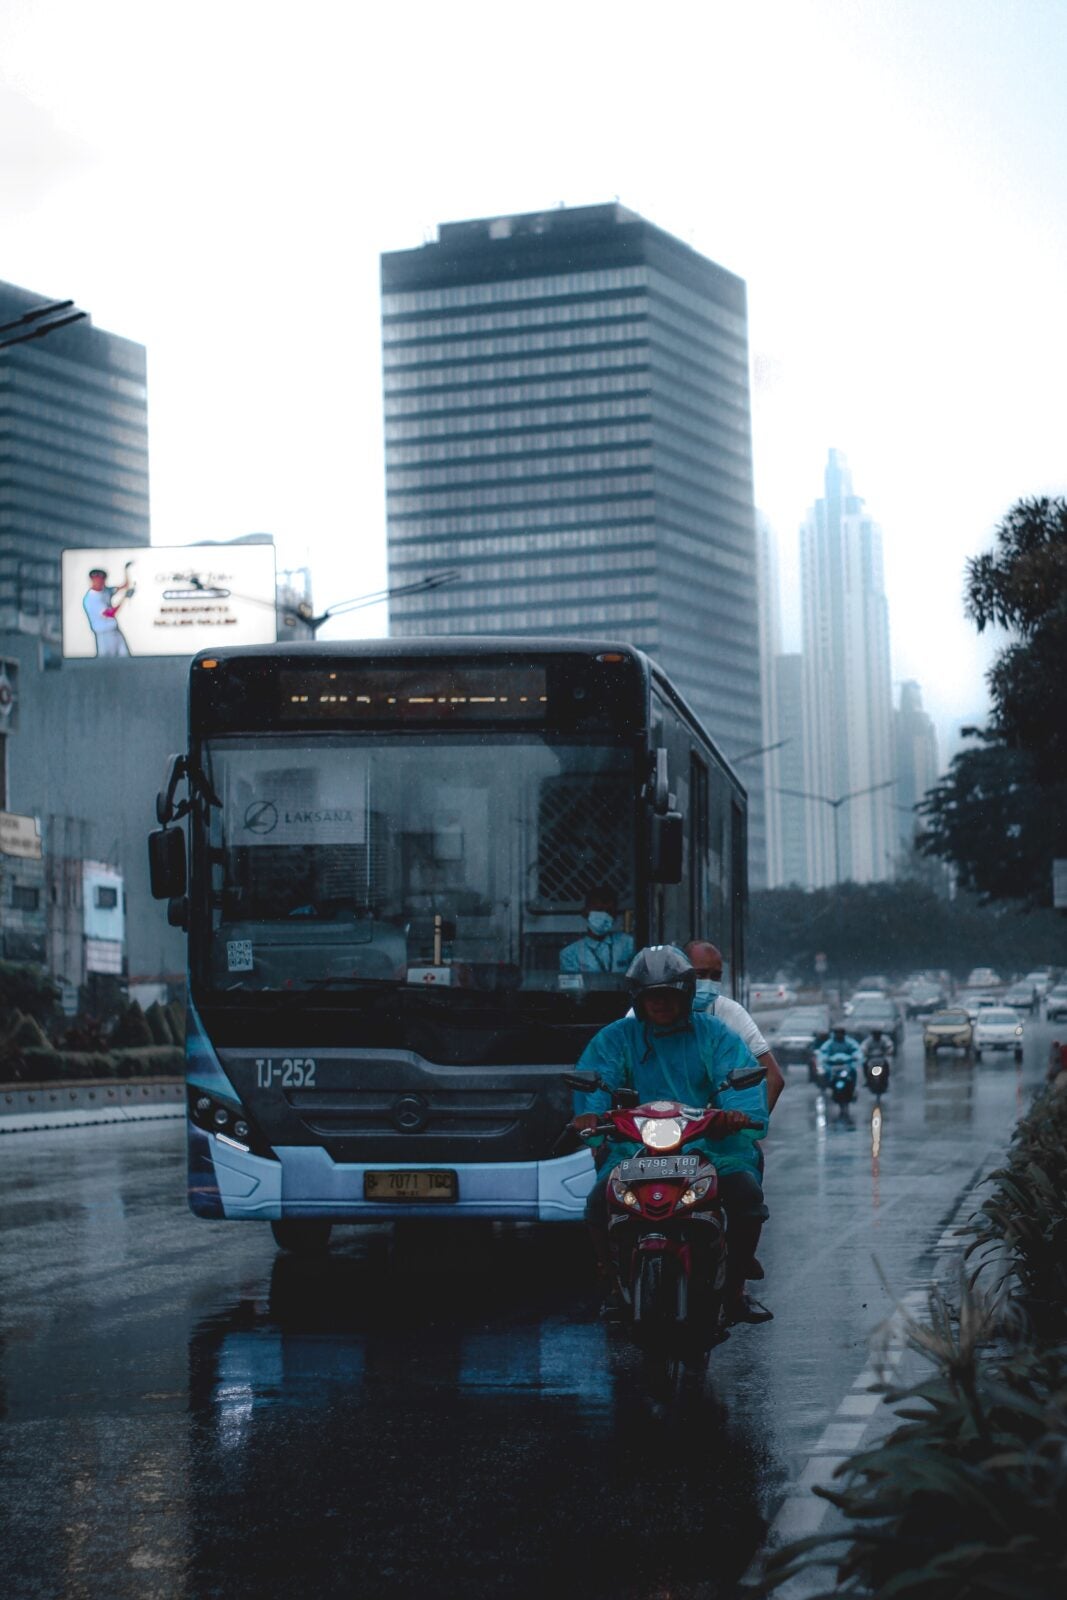 motorcycle next to bus on rainy road